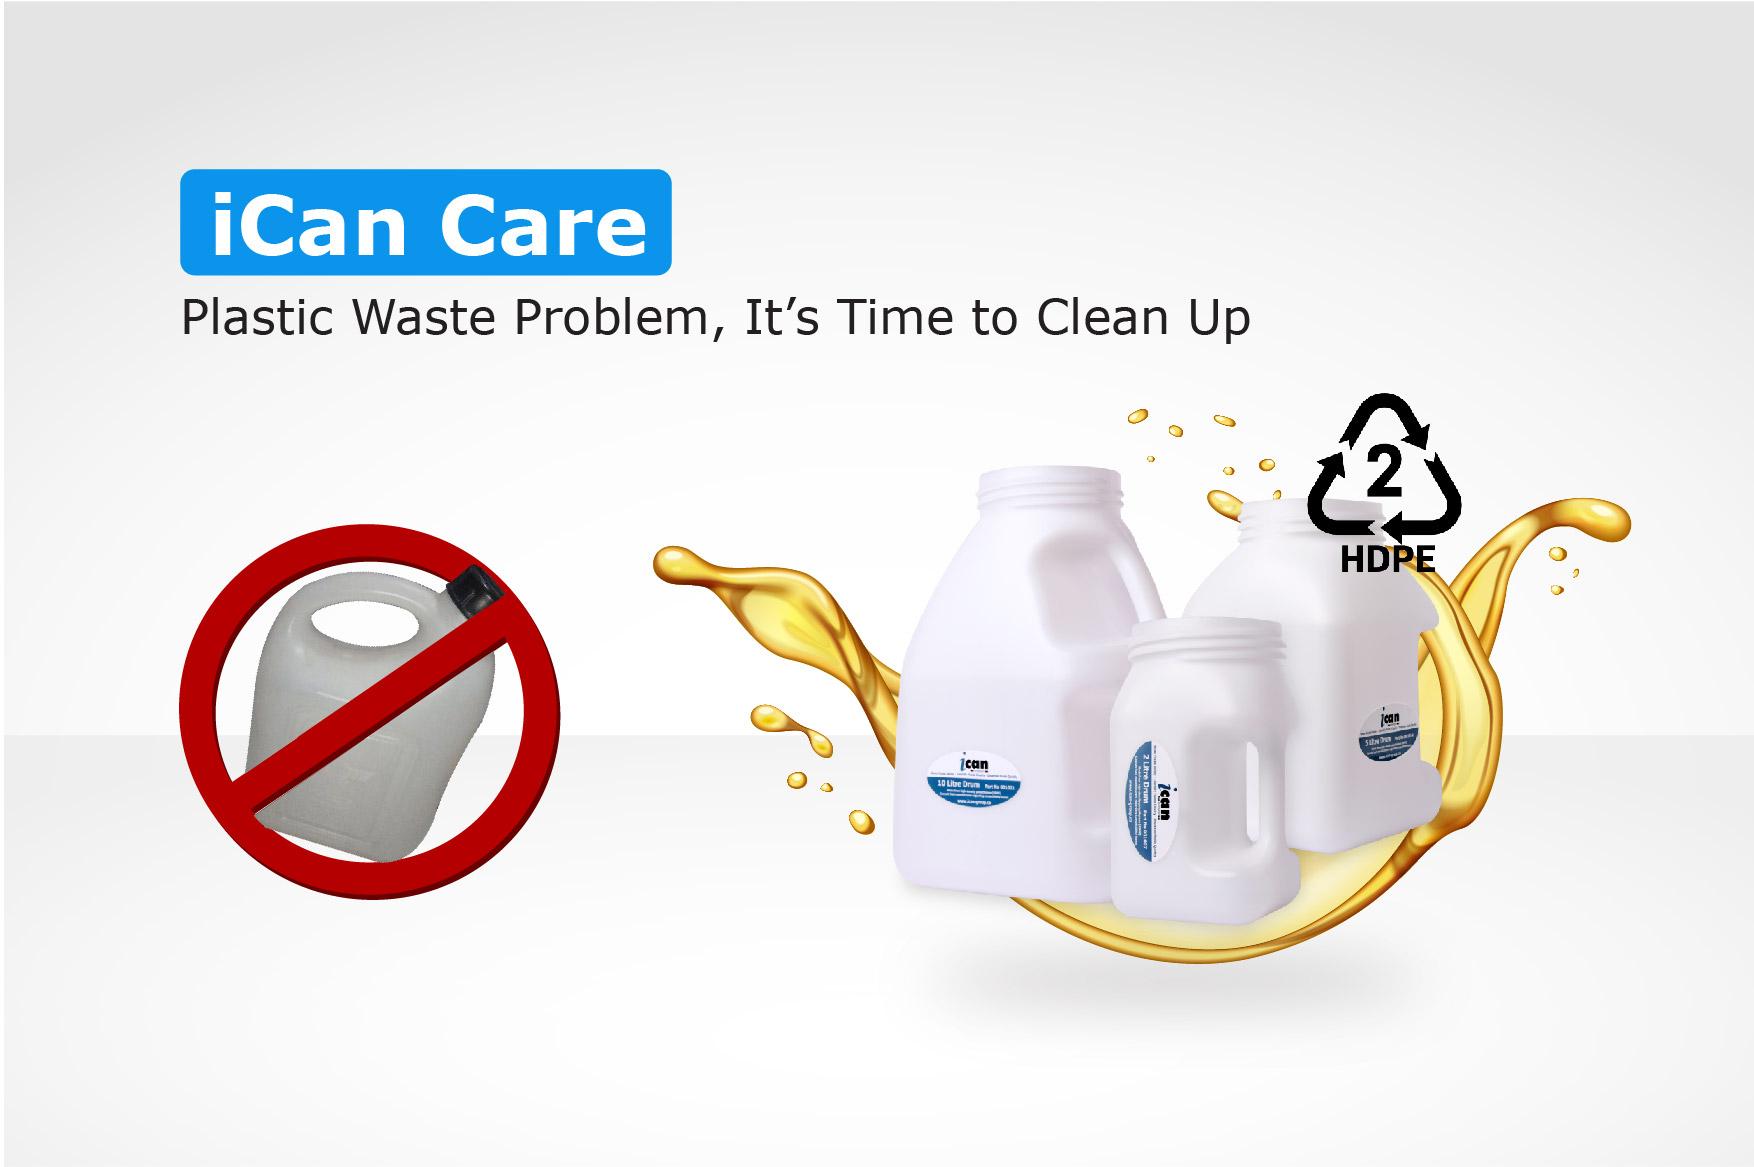 iCan Care: Plastic Waste Problem, It’s Time to Clean Up